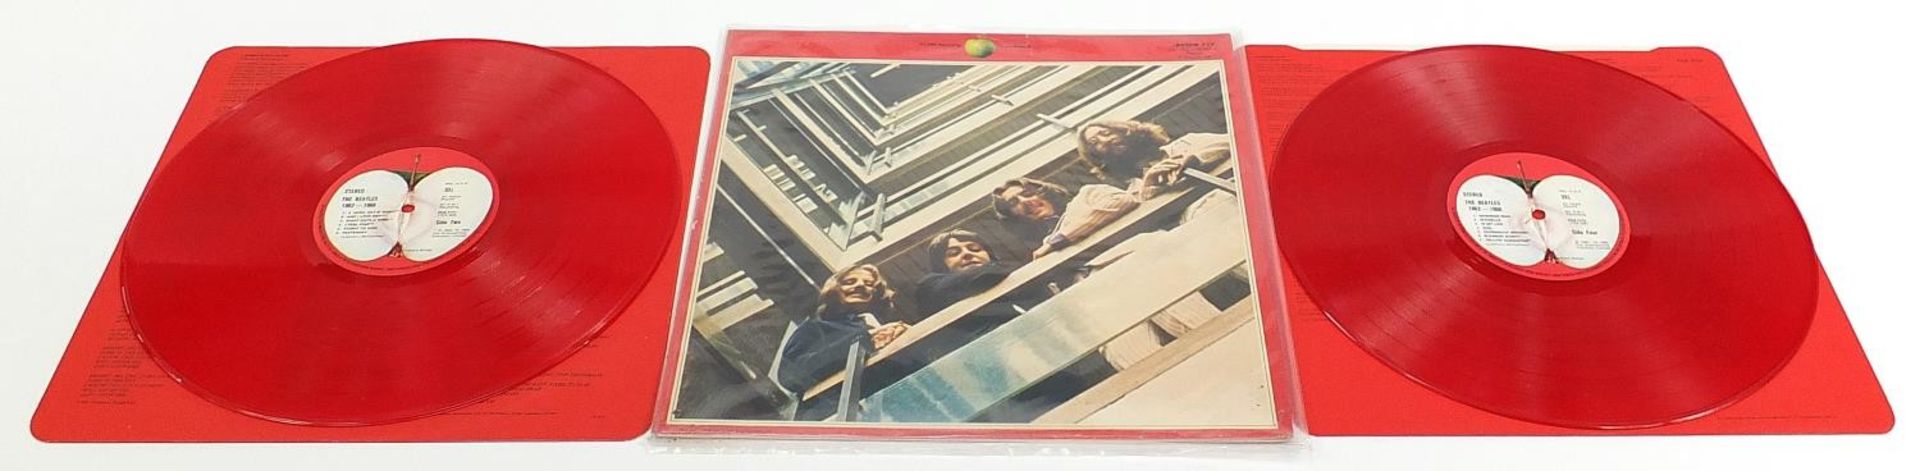 Nine The Beatles 1962-1966 vinyl LP records including Special Double Album set and red vinyl - Image 20 of 20